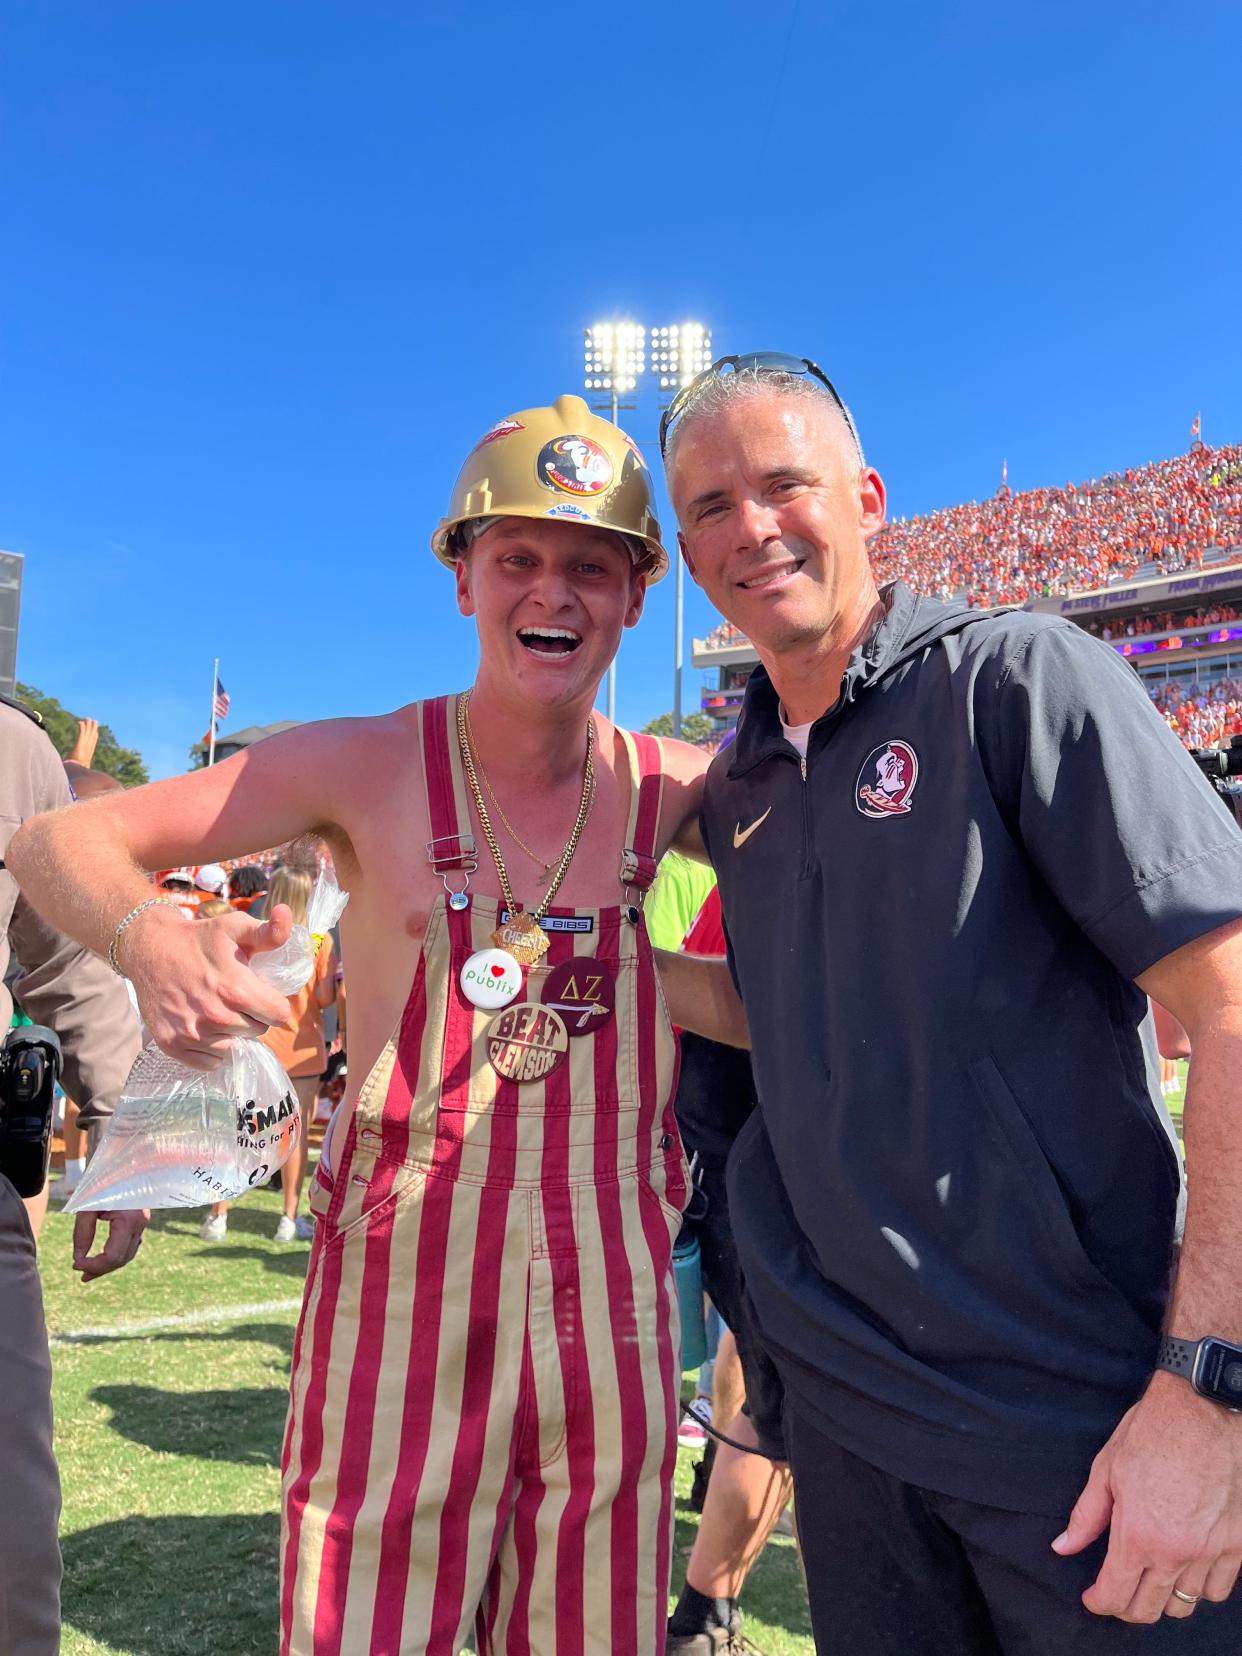 Florida State student junior Jack Henyecz and his pet gold fish, Garnet, have been a main fixture at Florida State home and away football games this season. The fish has been popular amongst fans, players and even a certain coach.